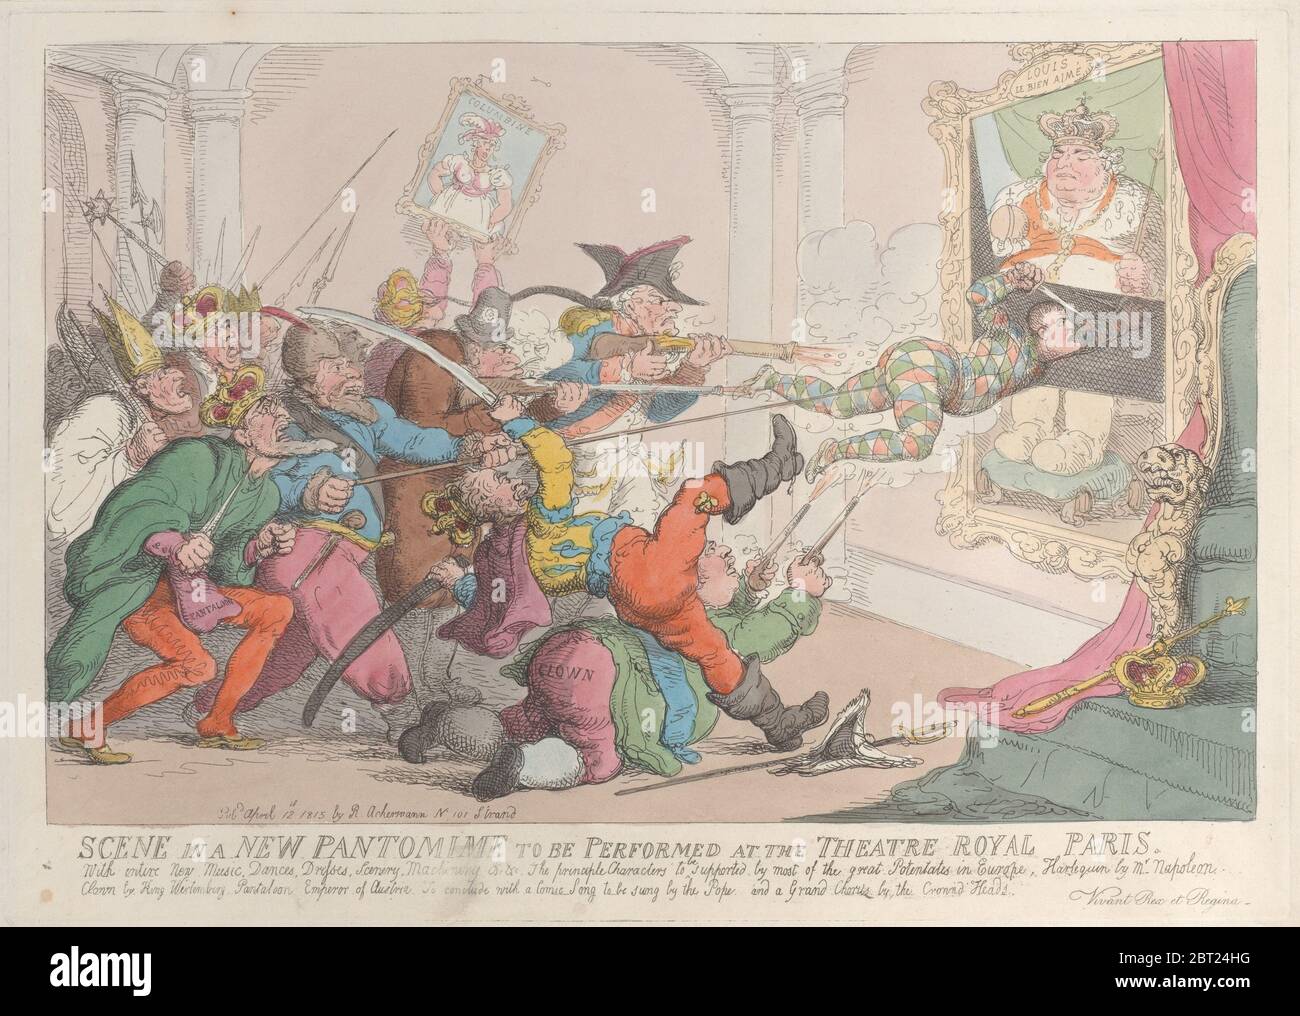 Scene in a New Pantomime to be Performed at the Theatre Royal Paris, April 12, 1815. Stock Photo